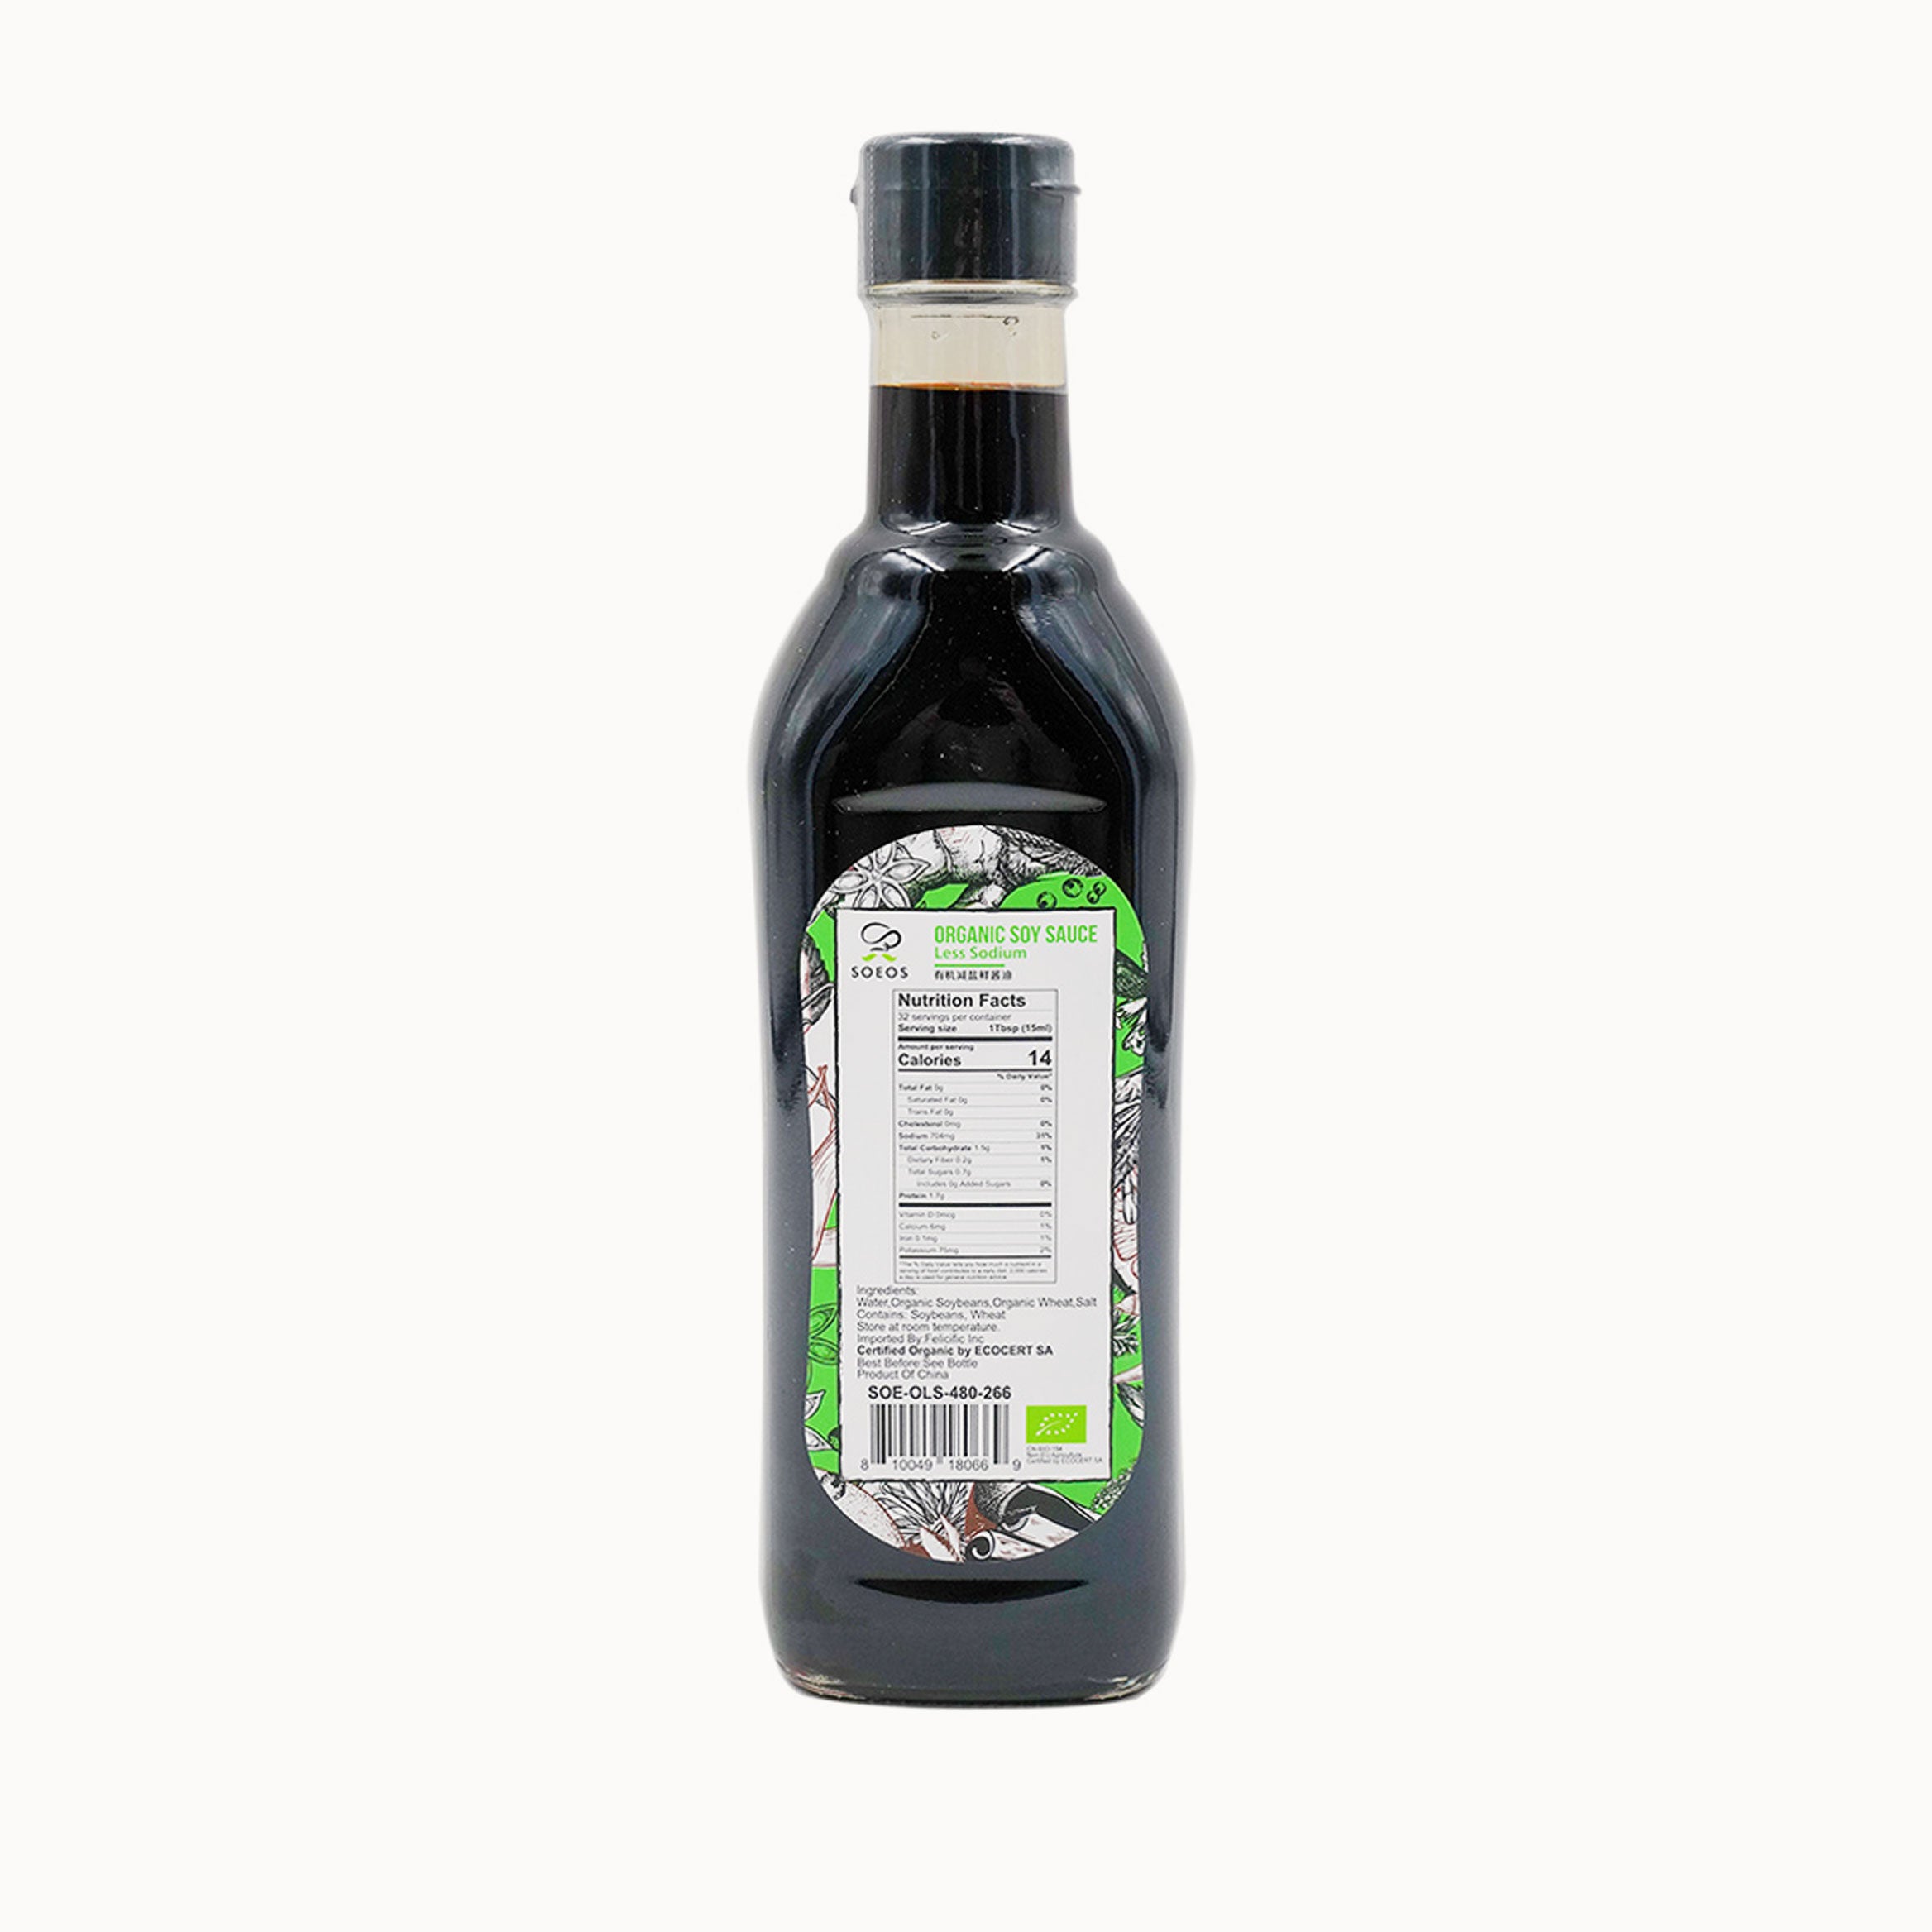 The nutrition facts label of Soeos low sodium soy sauce.